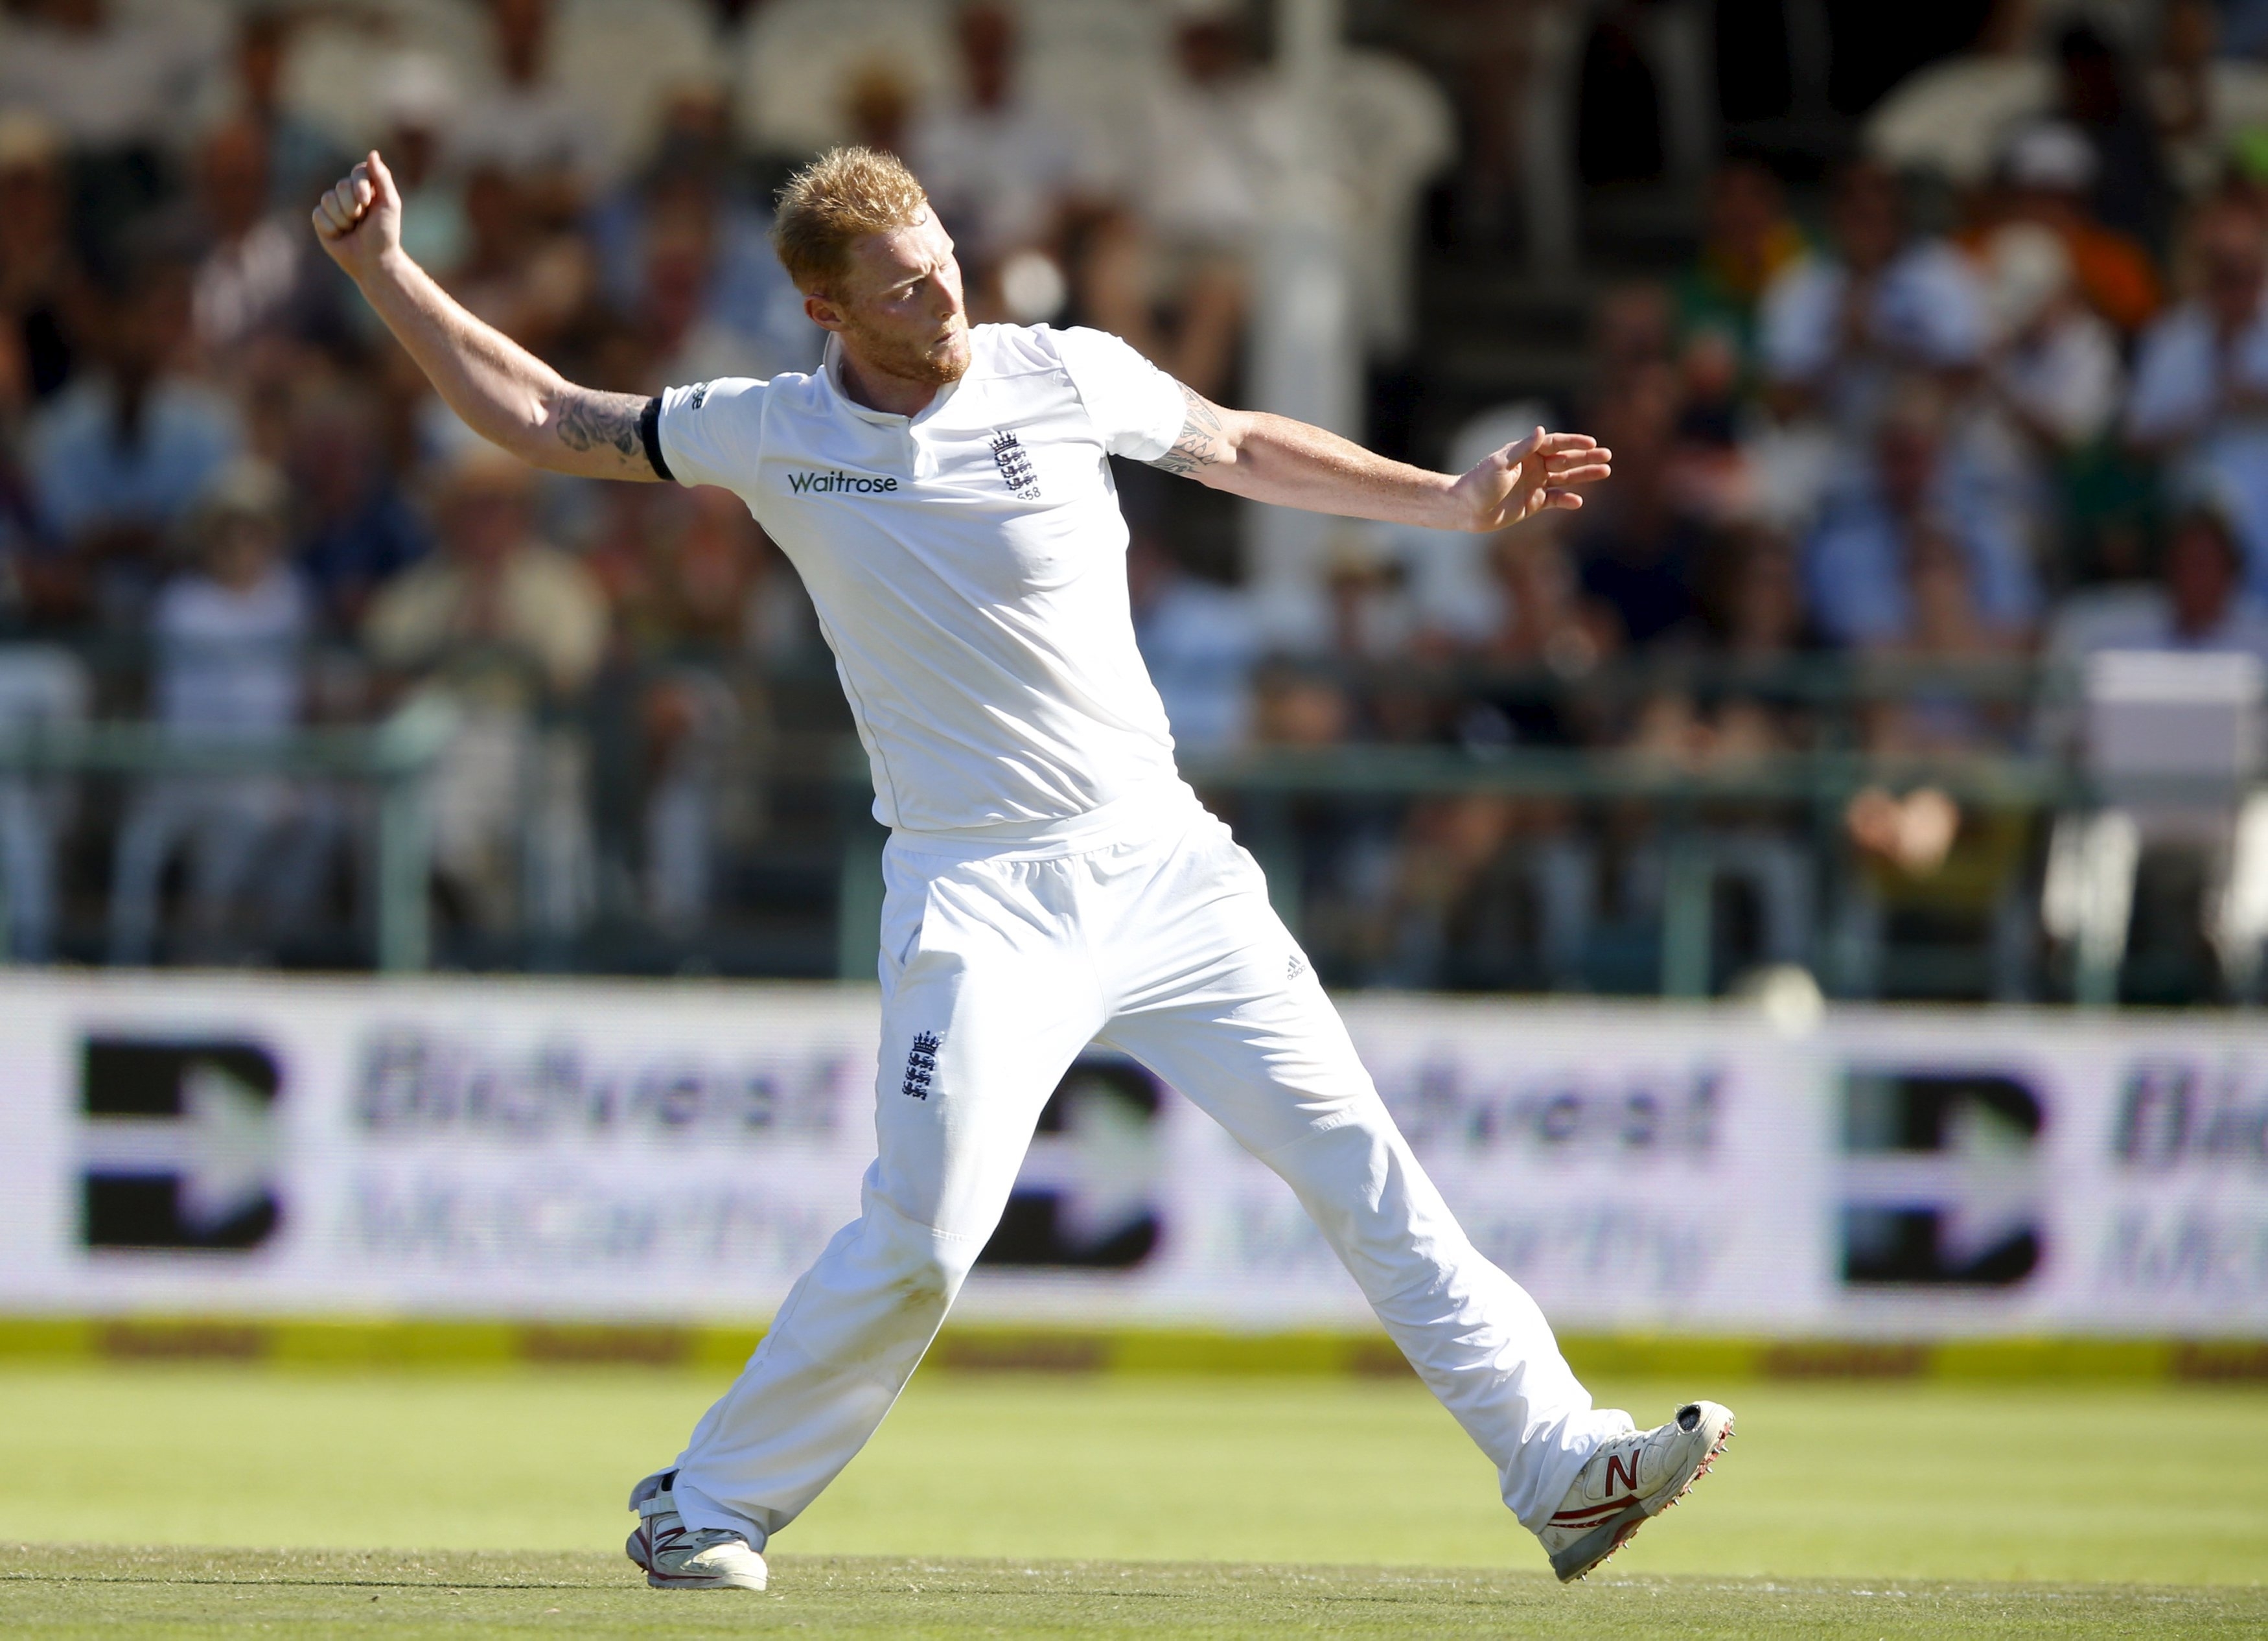 NZ vs ENG 2018: Stokes' return to England Test squad a huge boost, says Joe Root